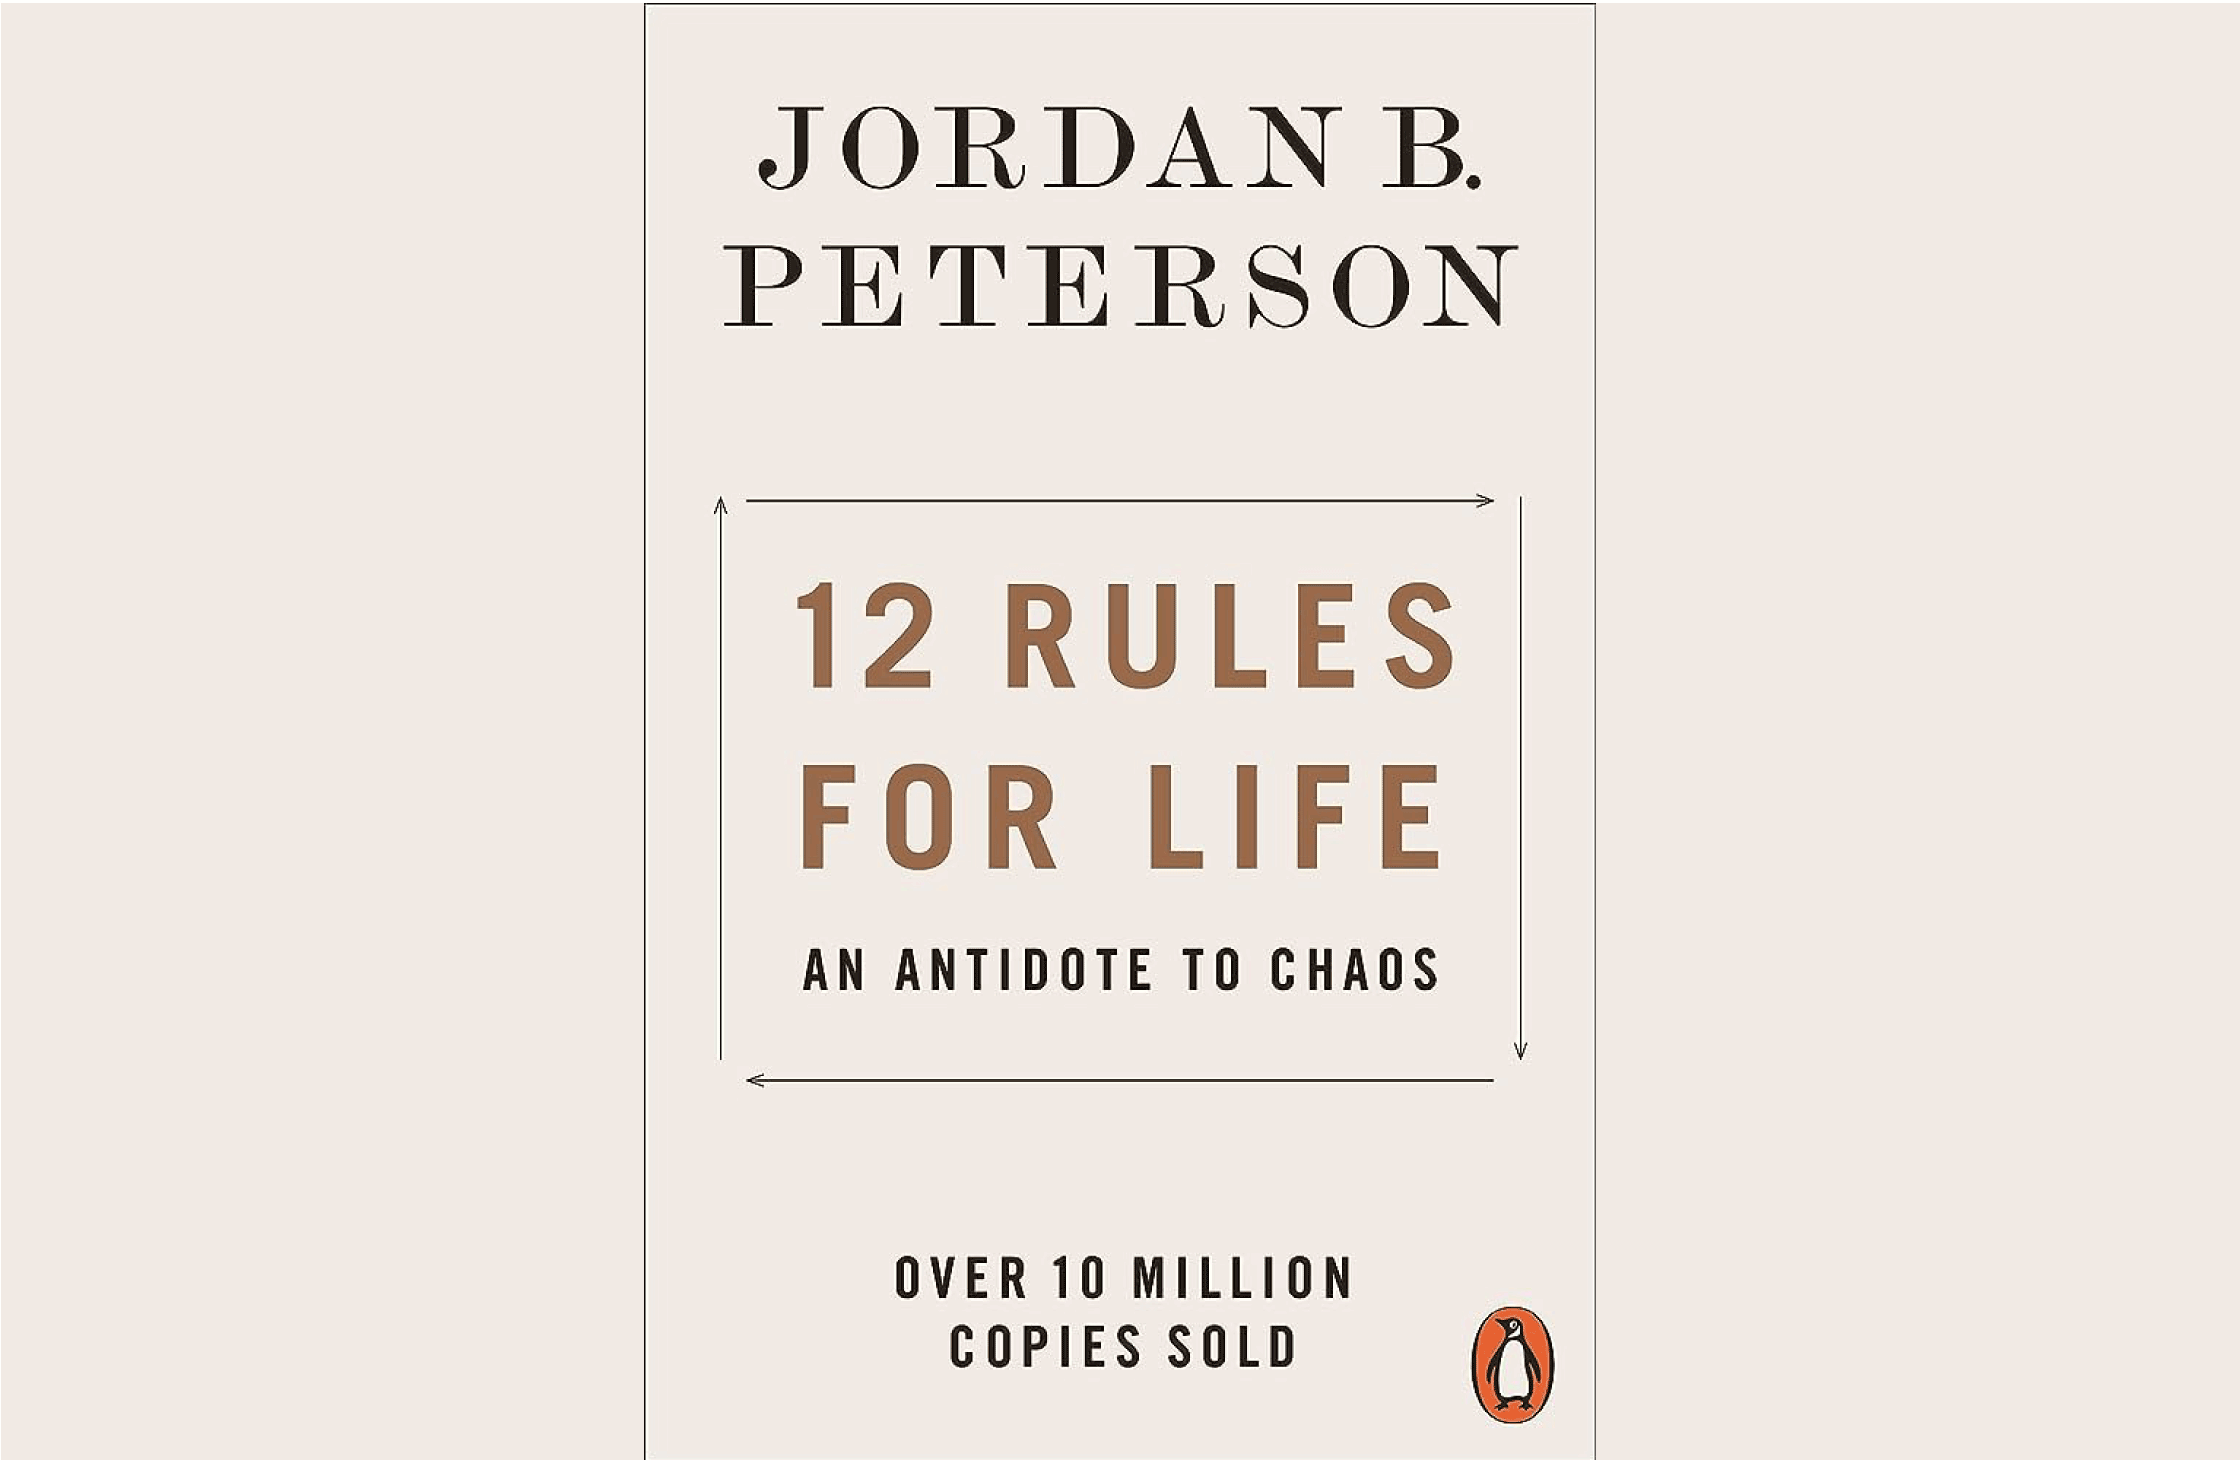 Embracing Life's Dichotomies: A Practical Guide to Jordan B. Peterson's "12 Rules for Life"